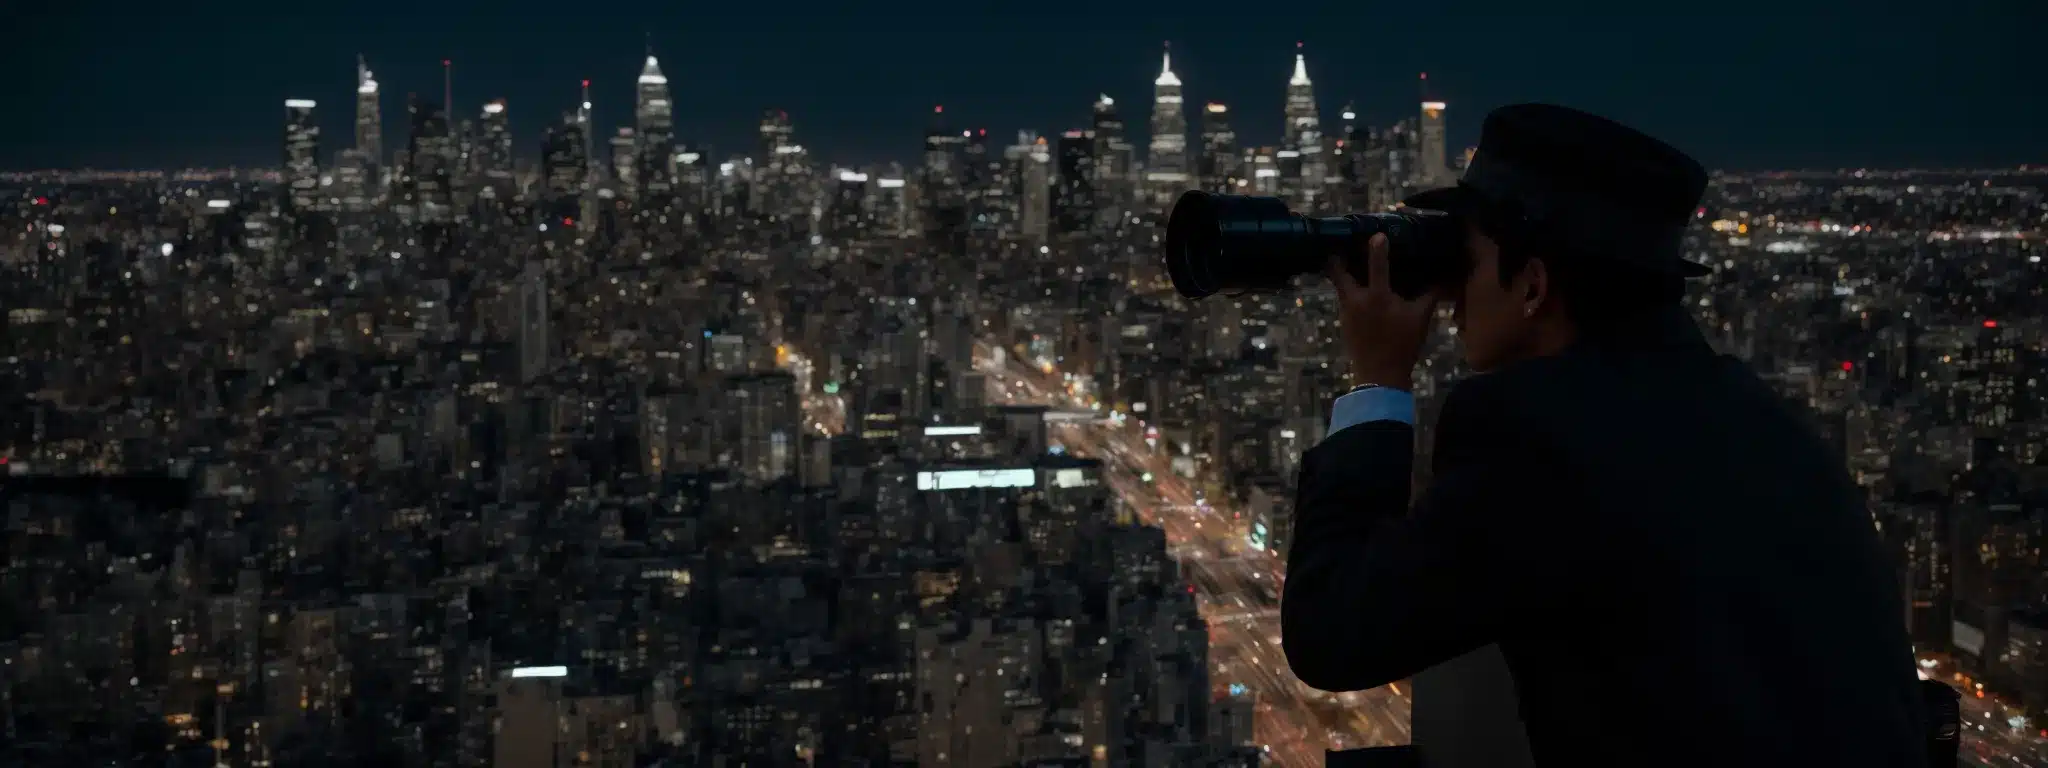 A Detective Peering Through Binoculars At A Cluster Of Billboards Illuminating A Cityscape At Night.